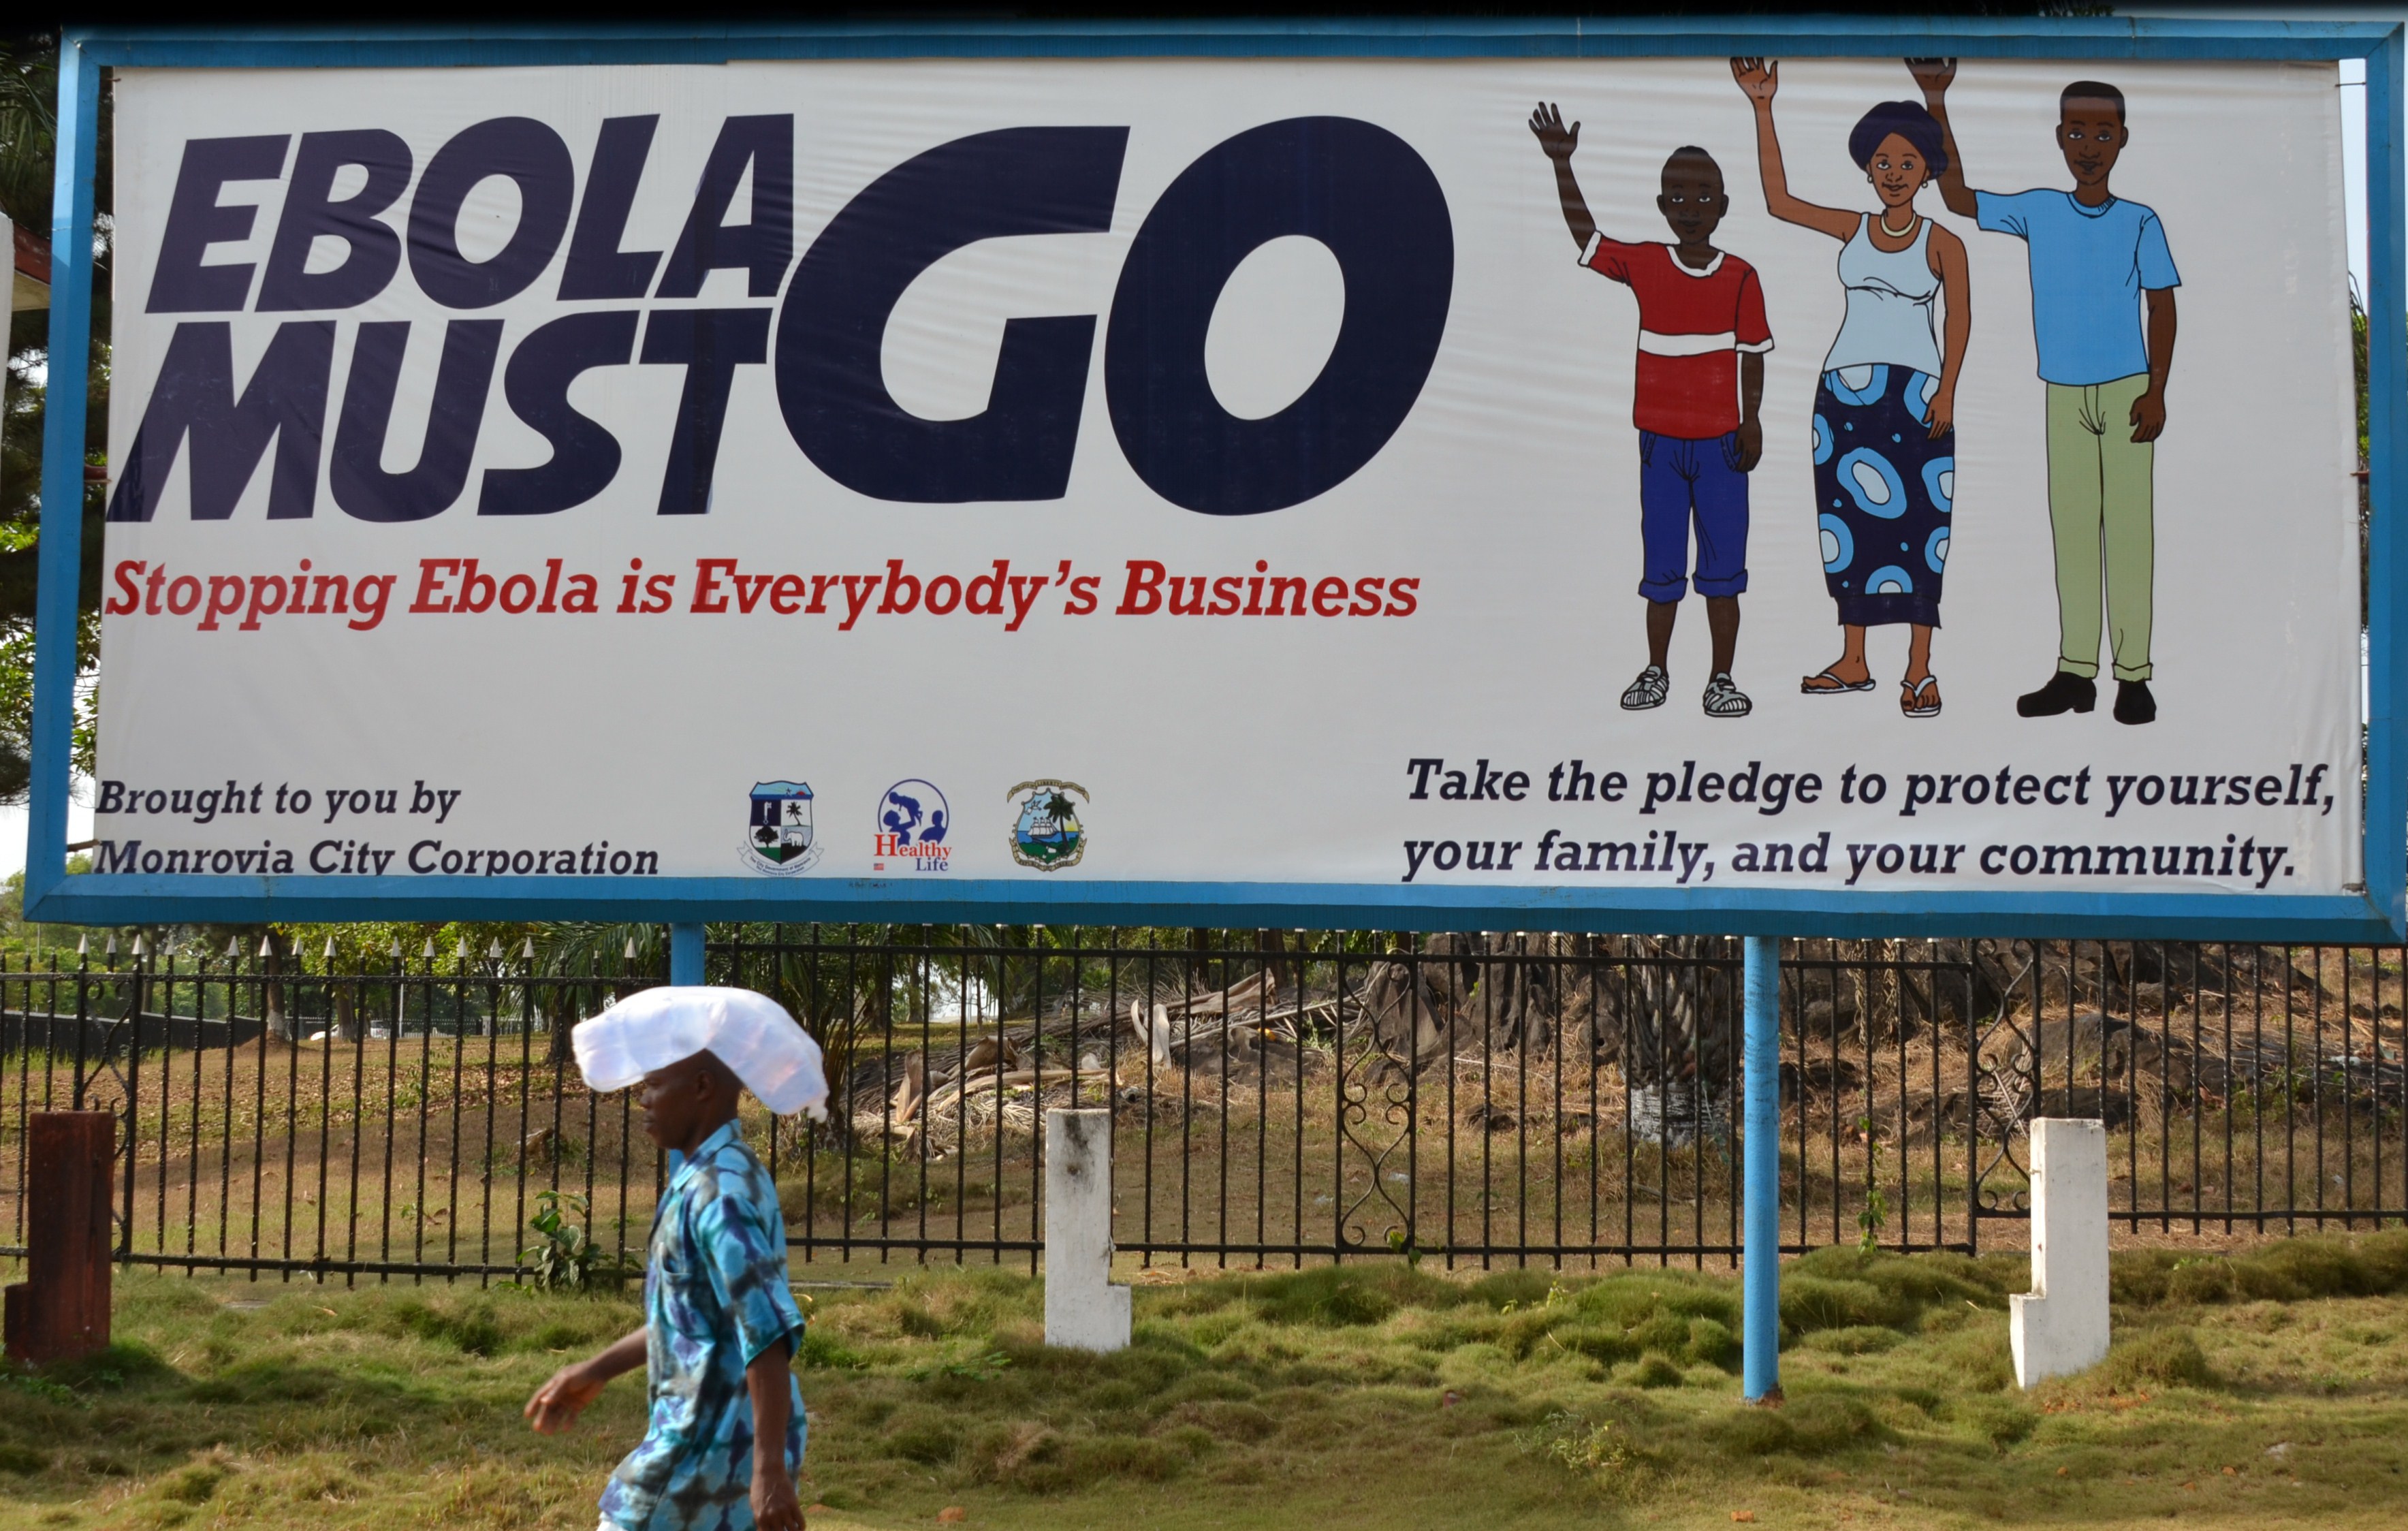 A man walks past an ebola campaign banner with the new slogan "Ebola Must GO" in Monrovia, Liberia on Feb. 23, 2015.